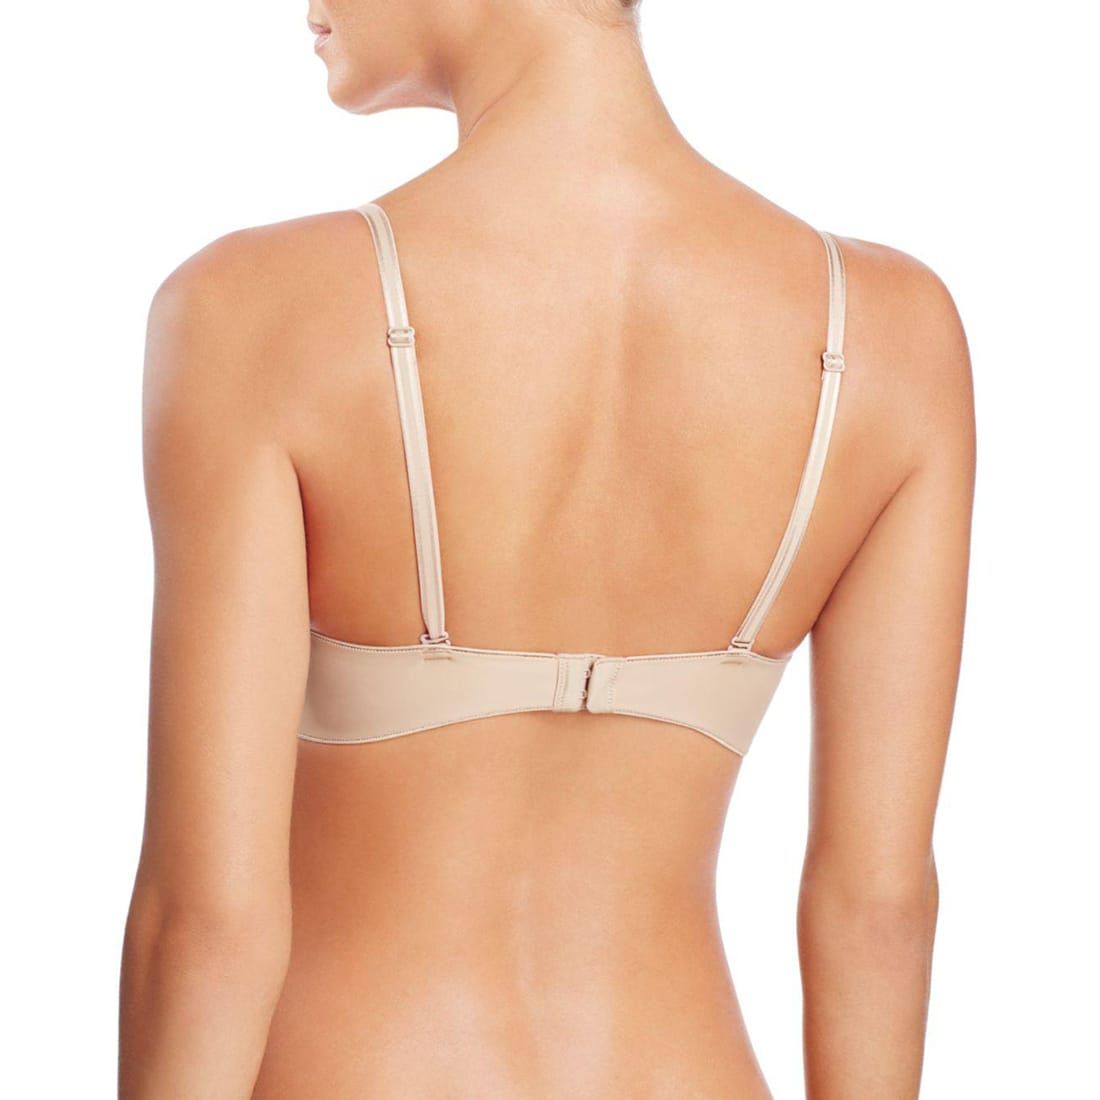 B.TEMPT'D - FREE SHIPPING -Faithfully Yours Bra- Nude